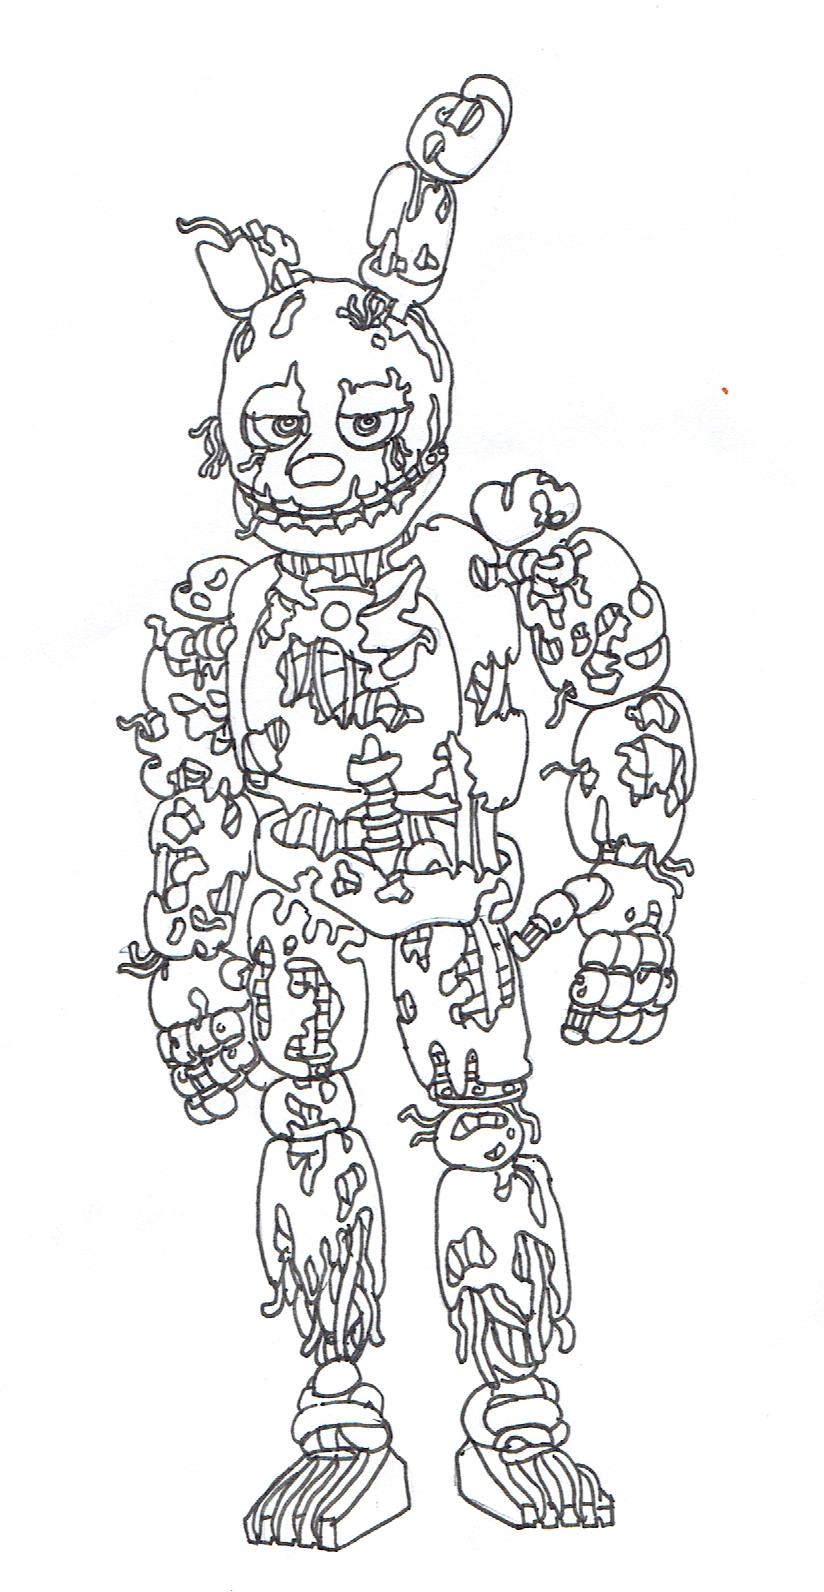 924 Animal Springtrap Coloring Pages with disney character